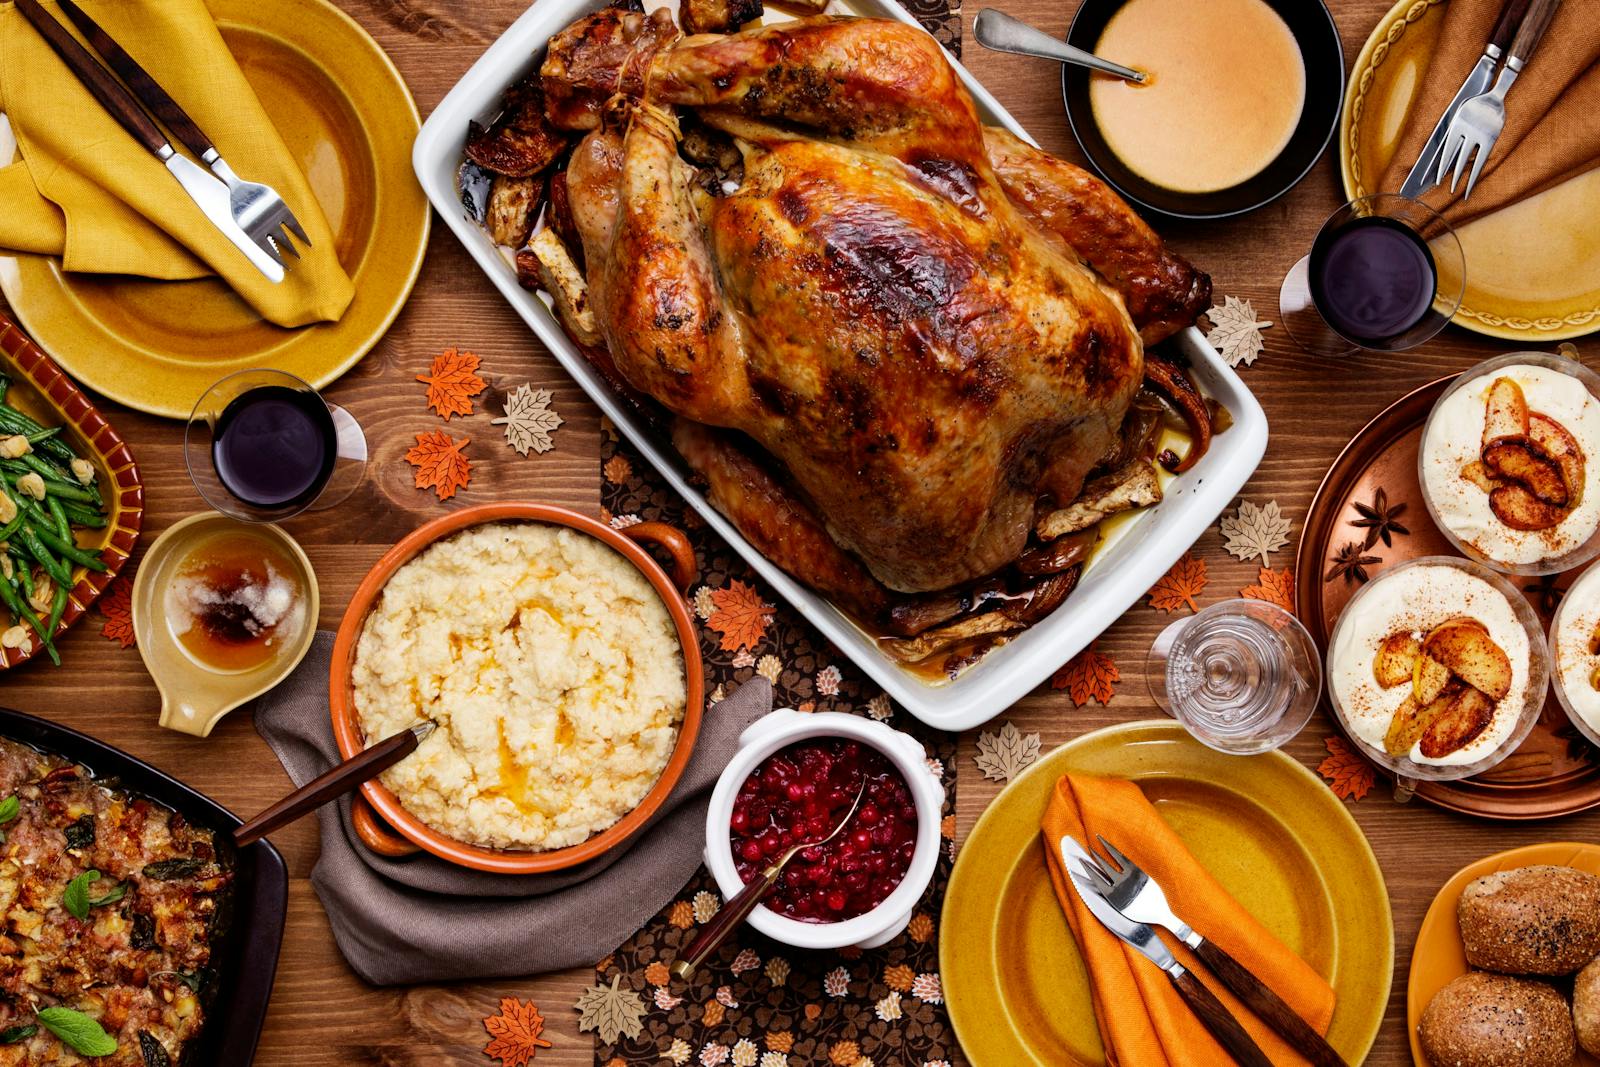 Wanted: Menu Ideas For Hosting a Full-On Keto Thanksgiving! - Food ...